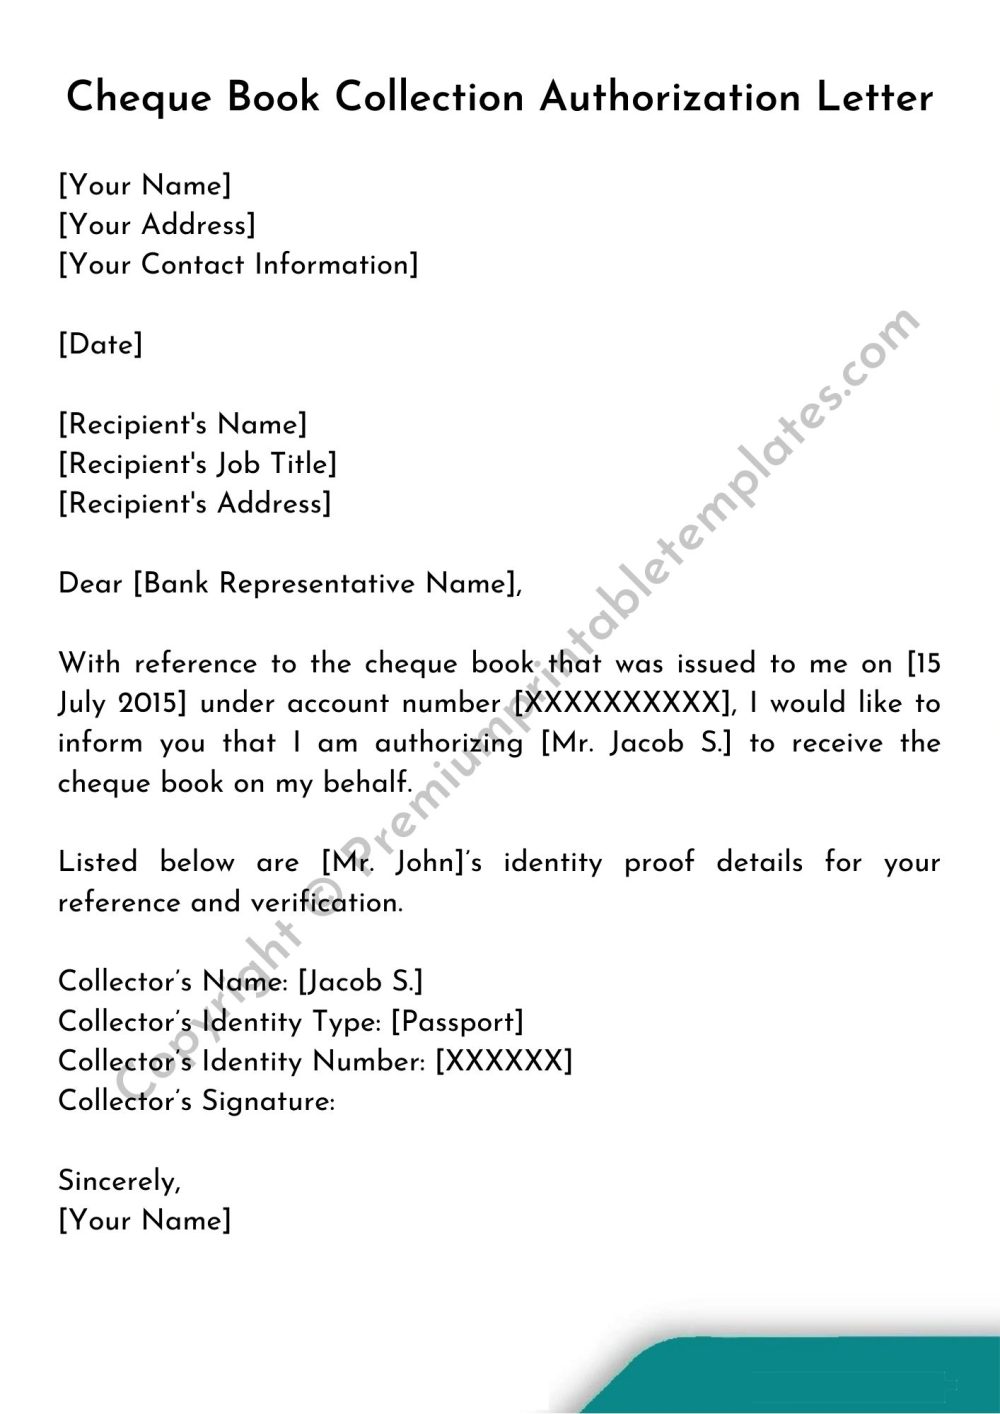 Cheque Book Collection Authorization Letter Template